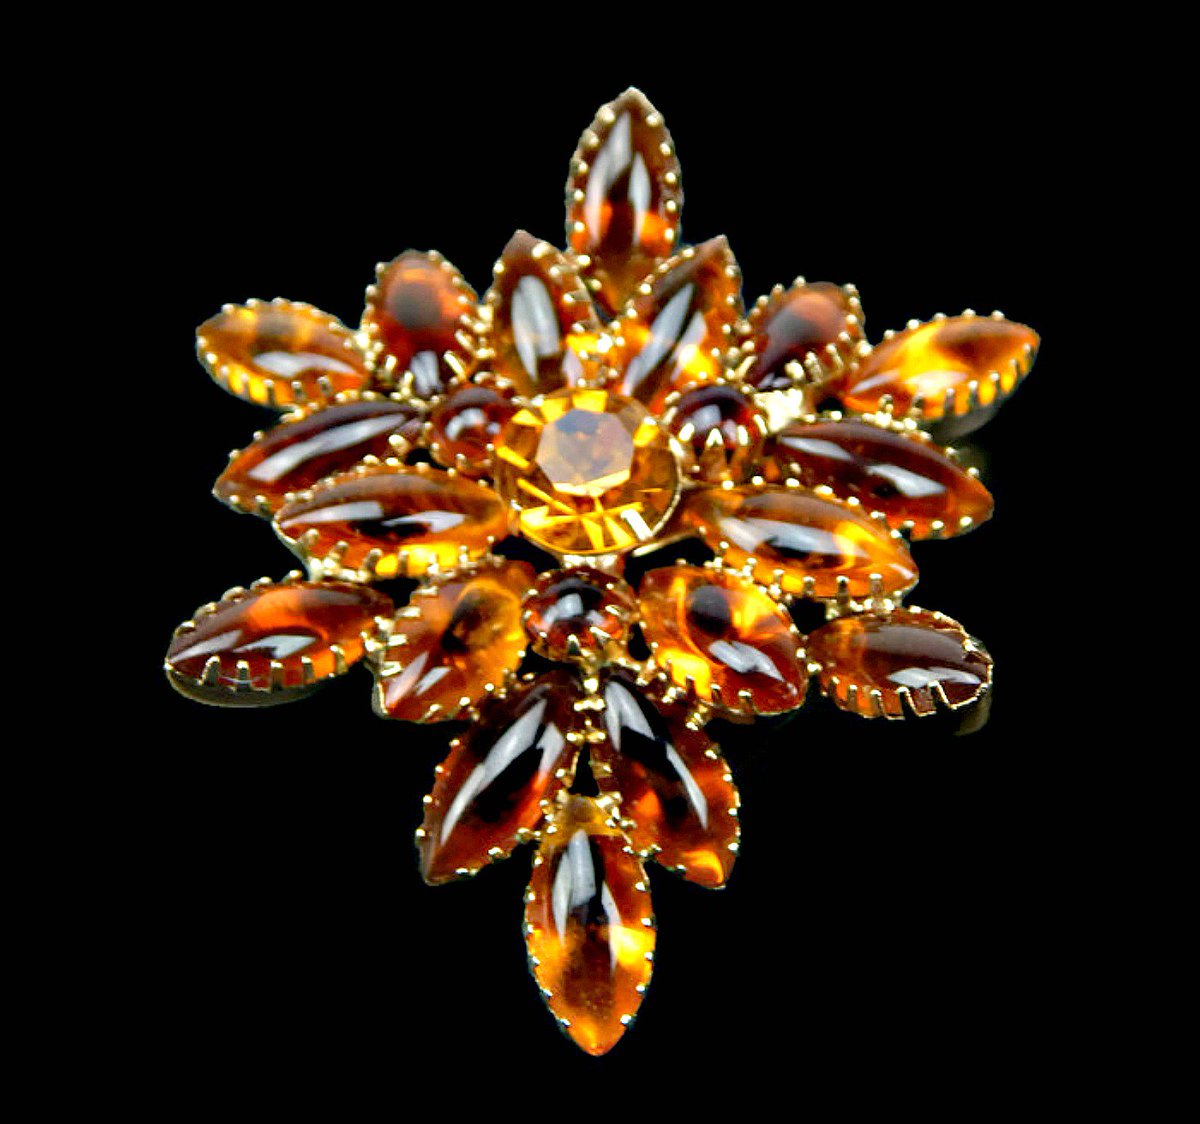 etsy.me/2RHFX9P #ArtGlass #Navette and #RhinestoneBrooch #TopazBrown and #Amber #AngledLayered #DogToothProngSet #vintage #jewelry #collectiblejewelry #artglassjewelry #rhinestonejewlry #autumnjewelry #falljewelry #fallcolors #forher #etsy #gotvintage